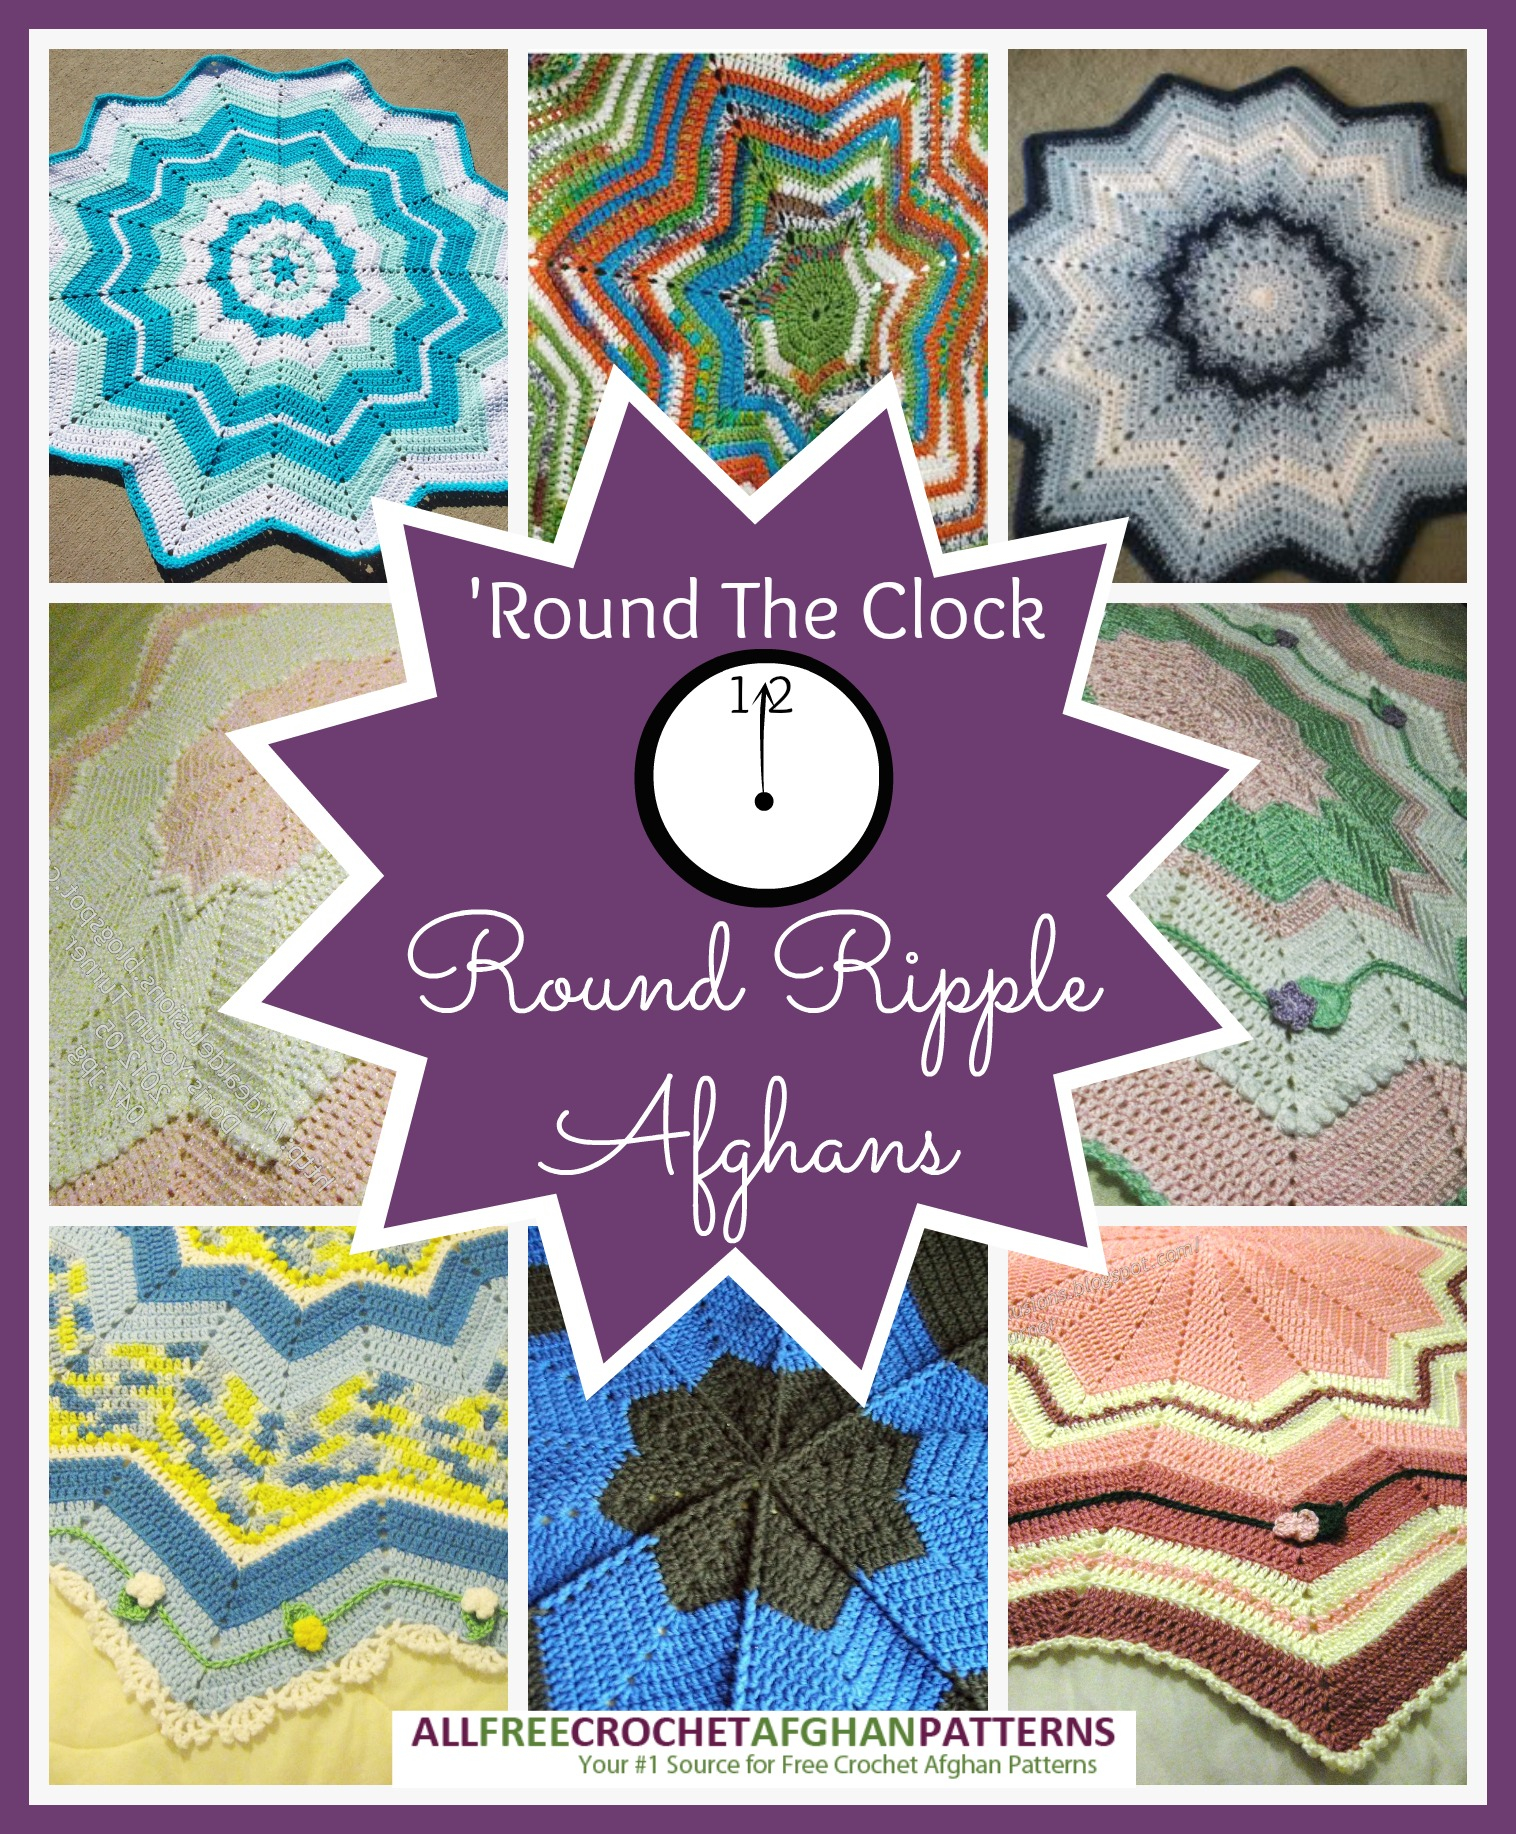 Crochet Round Afghan Pattern Free Round The Clock 12 Round Ripple Afghans Stitch And Unwind